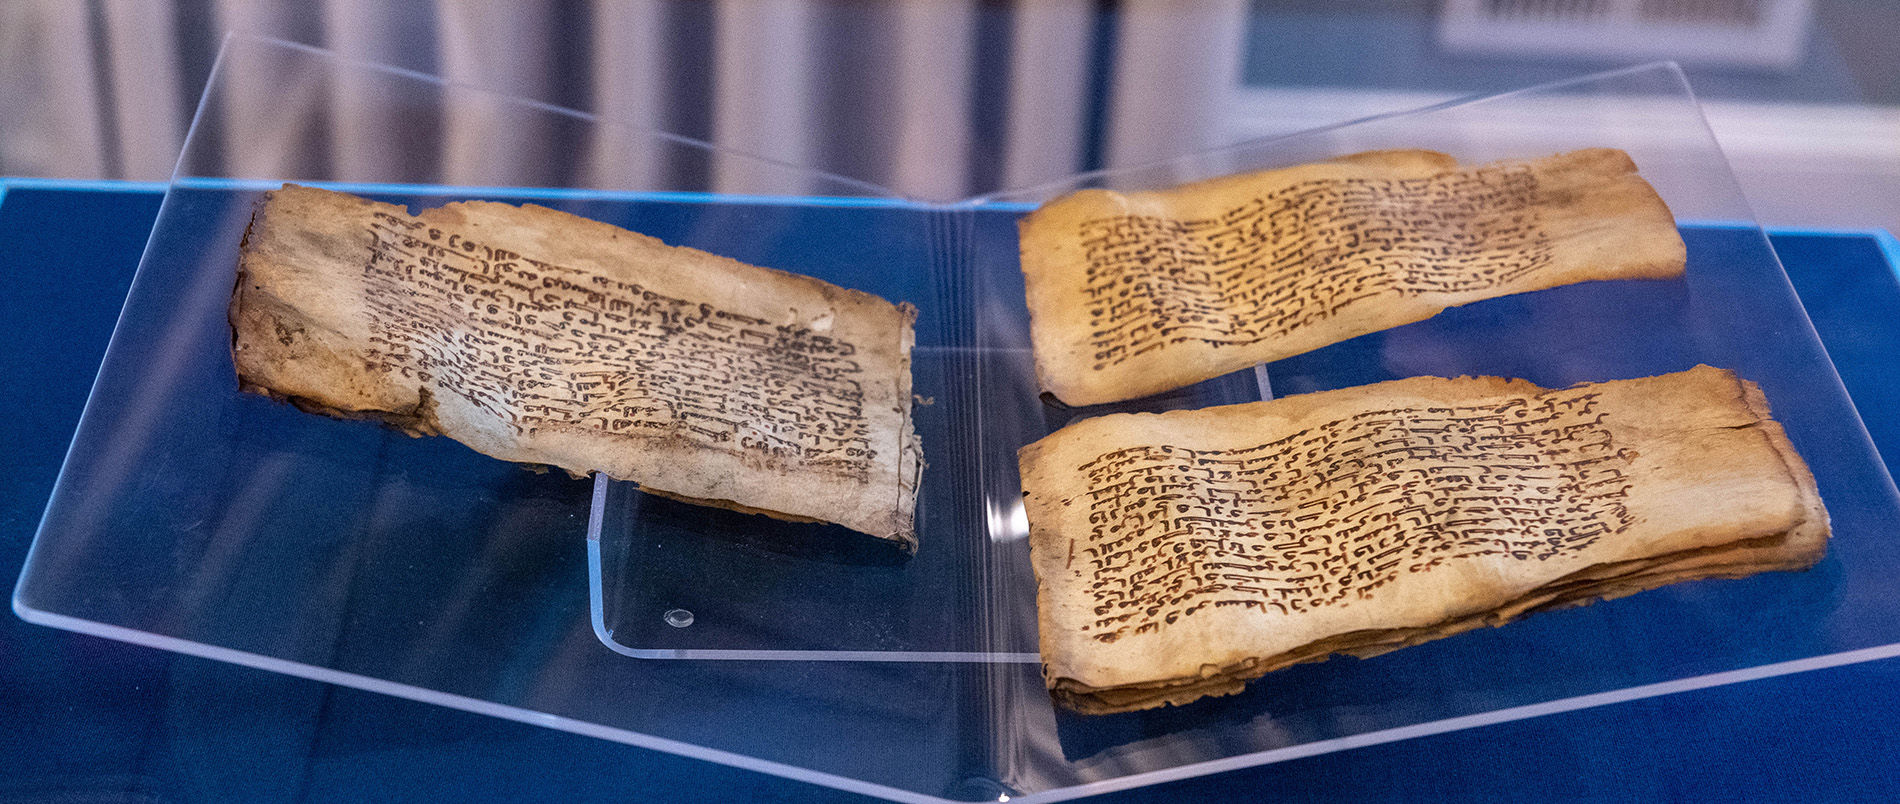 HSI, CBP, Department of State, US Attorney’s Office, Smithsonian Institution conduct repatriation of stolen cultural property to Yemeni Embassy